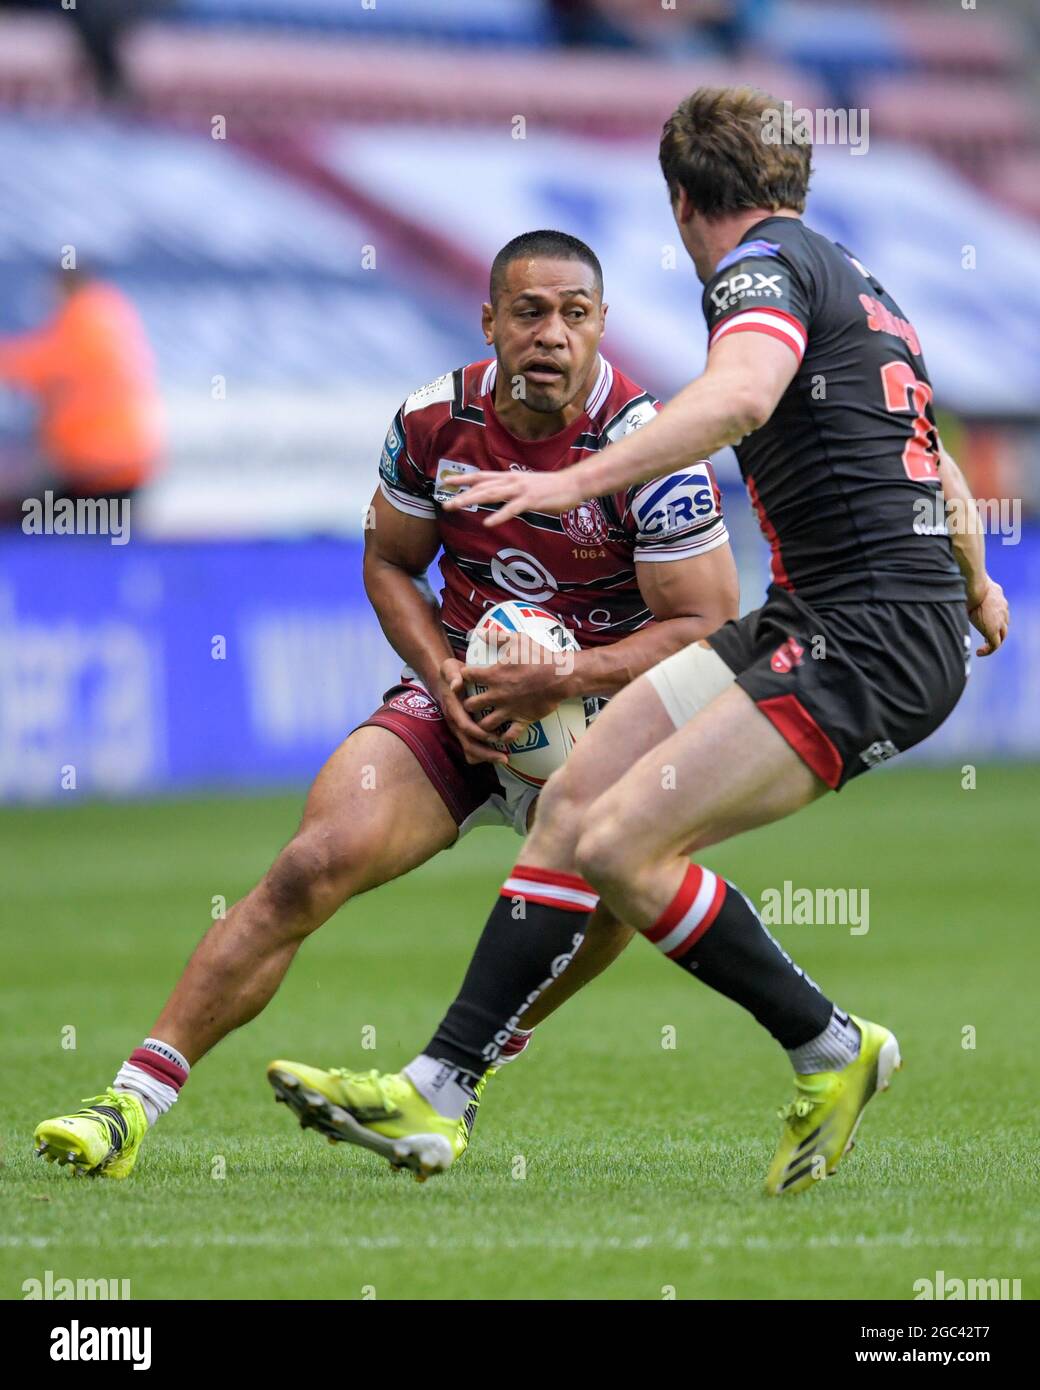 Willie Isa #11 of Wigan Warriors full of smiles with an egg size hematoma  on his head during the Betfred Super League Round 9 match Warrington Wolves  vs Wigan Warriors at Halliwell